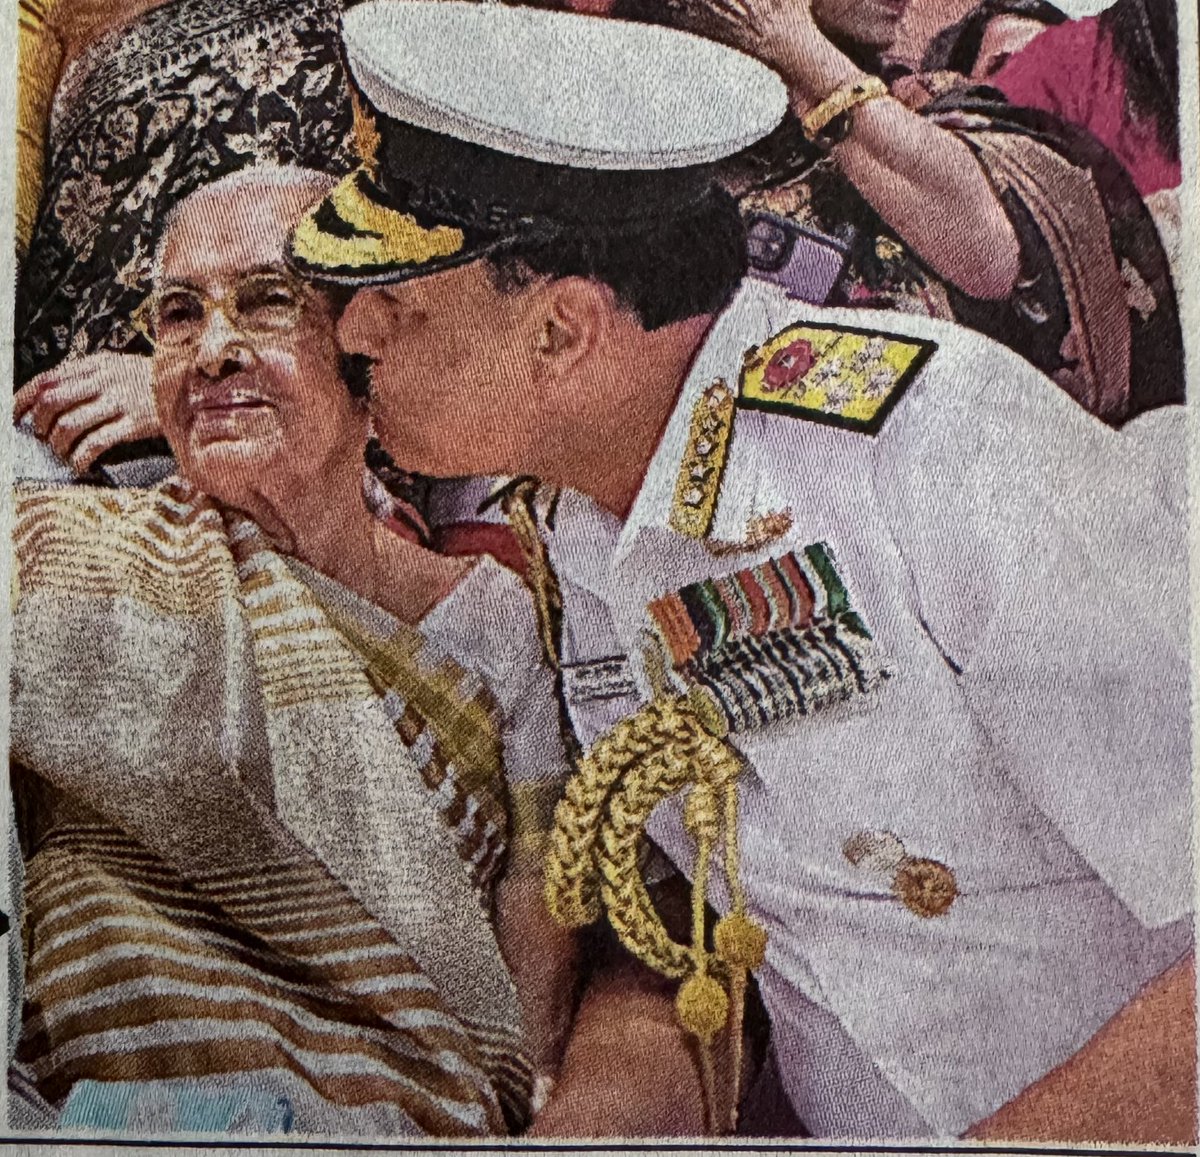 Admiral Dinesh Tripathi, PVSM, AVSM, NM, assumed command of the #IndianNavy as the 26th Chief of the Naval Staff.
He was presented a ceremonial Guard of Honour at the South Block, #NewDelhi.
Congratulations sir👍
#IndianNavy